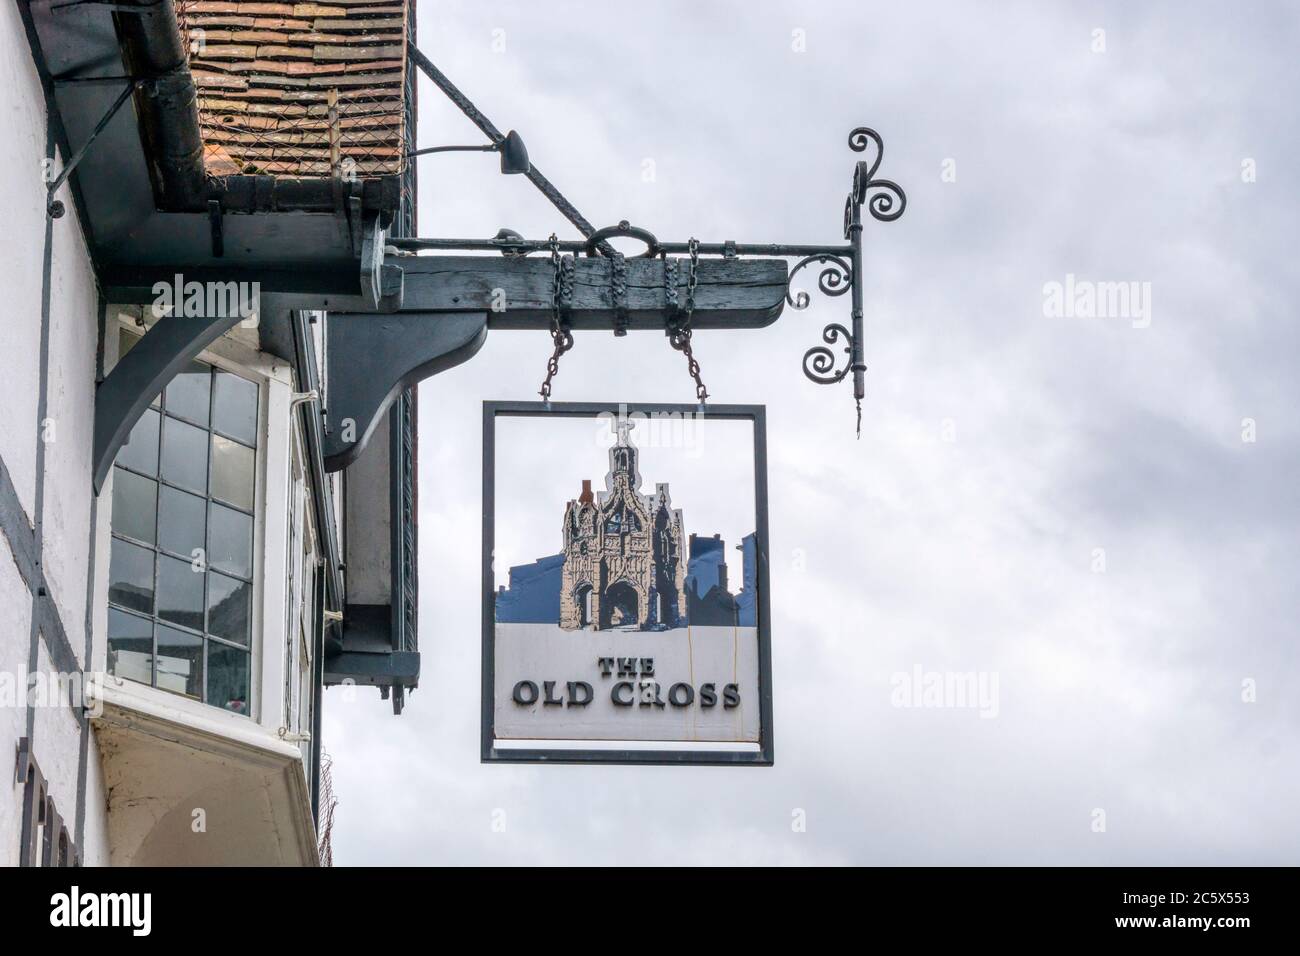 Pub sign for The Old Cross in North Street, Chichester shows the town's Market Cross. Stock Photo